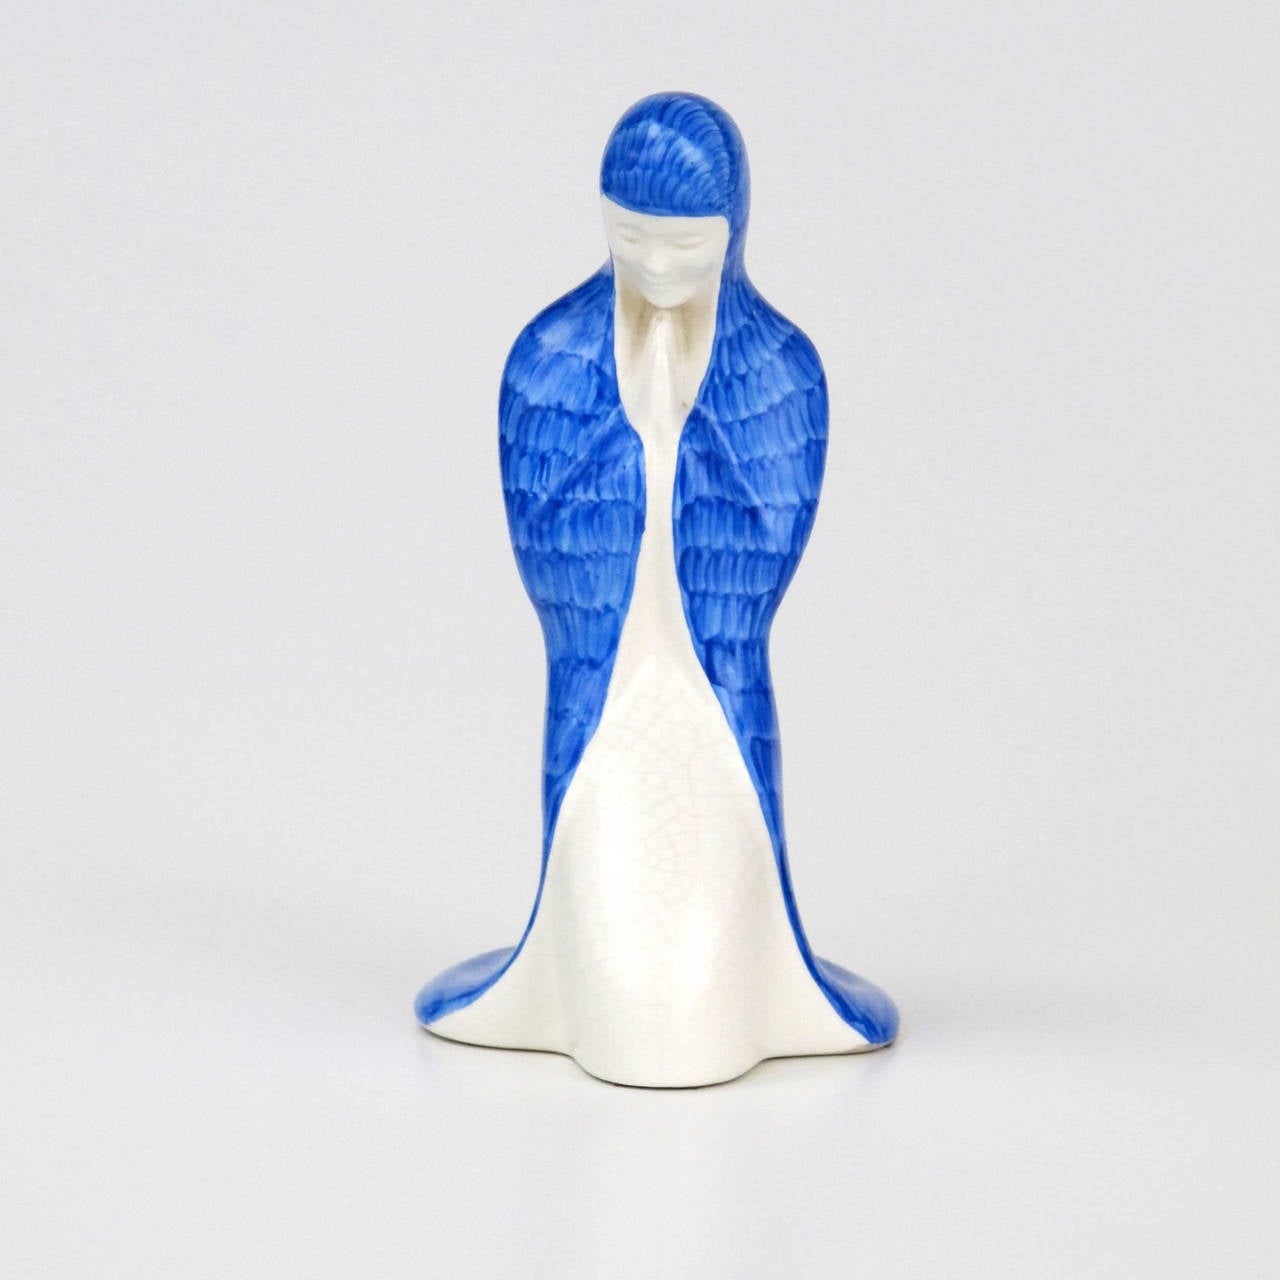 Delicate and serene piece of earthenware by Ed Antheunis for Koninklijke Plateelfabriek Zuid-Holland, Gouda. This kneeled female figure with a blue cloak was made around 1935 of white baking earthenware and has a manufacturer mark on the bottom.